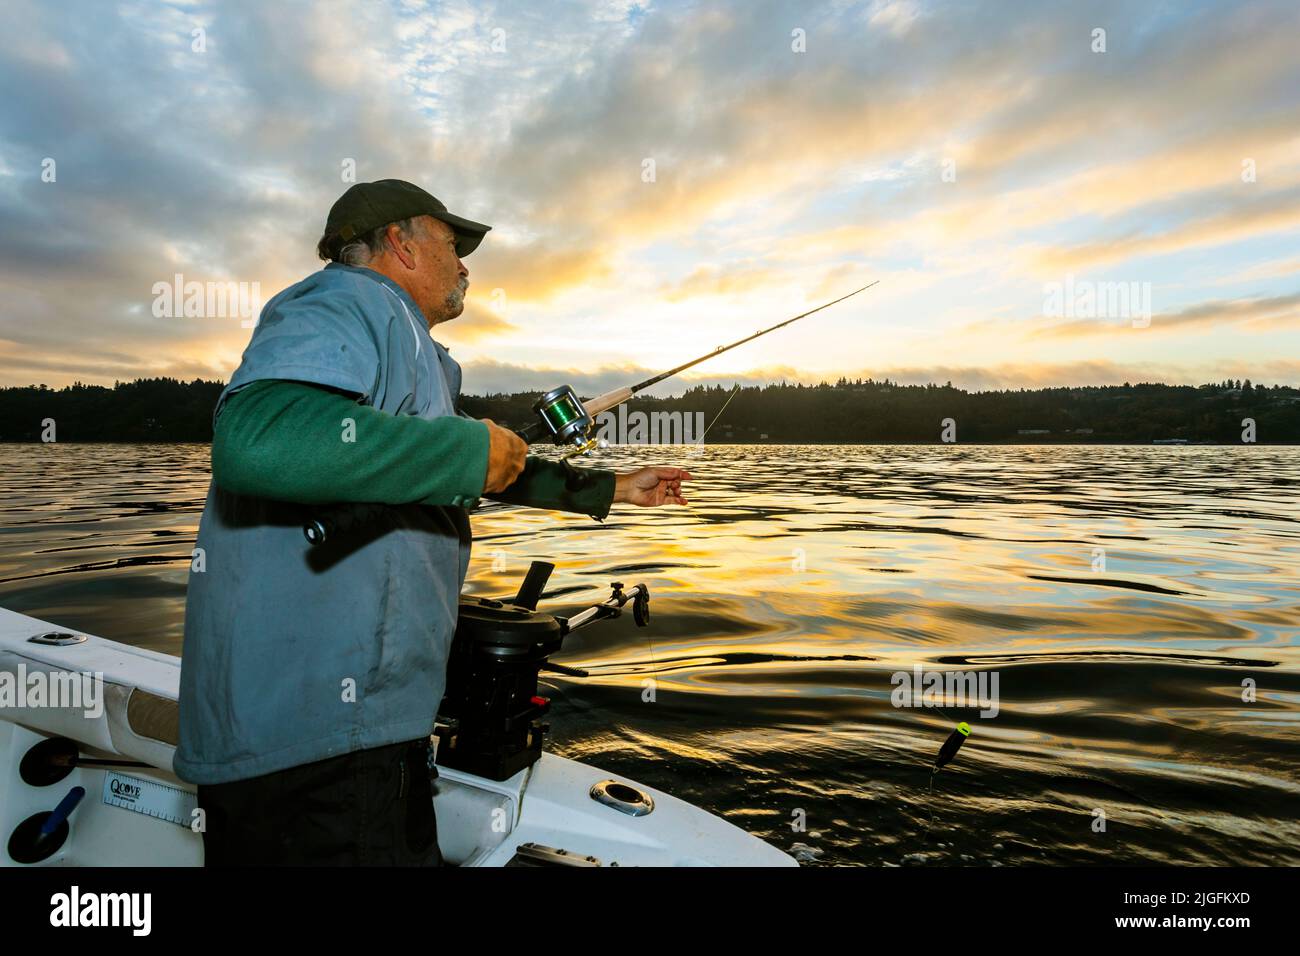 WA20626-00....WASHINGTON - Phil Russell sets a fishing pole while trolling for salmon in the Puget Sound. MR# R8 Stock Photo